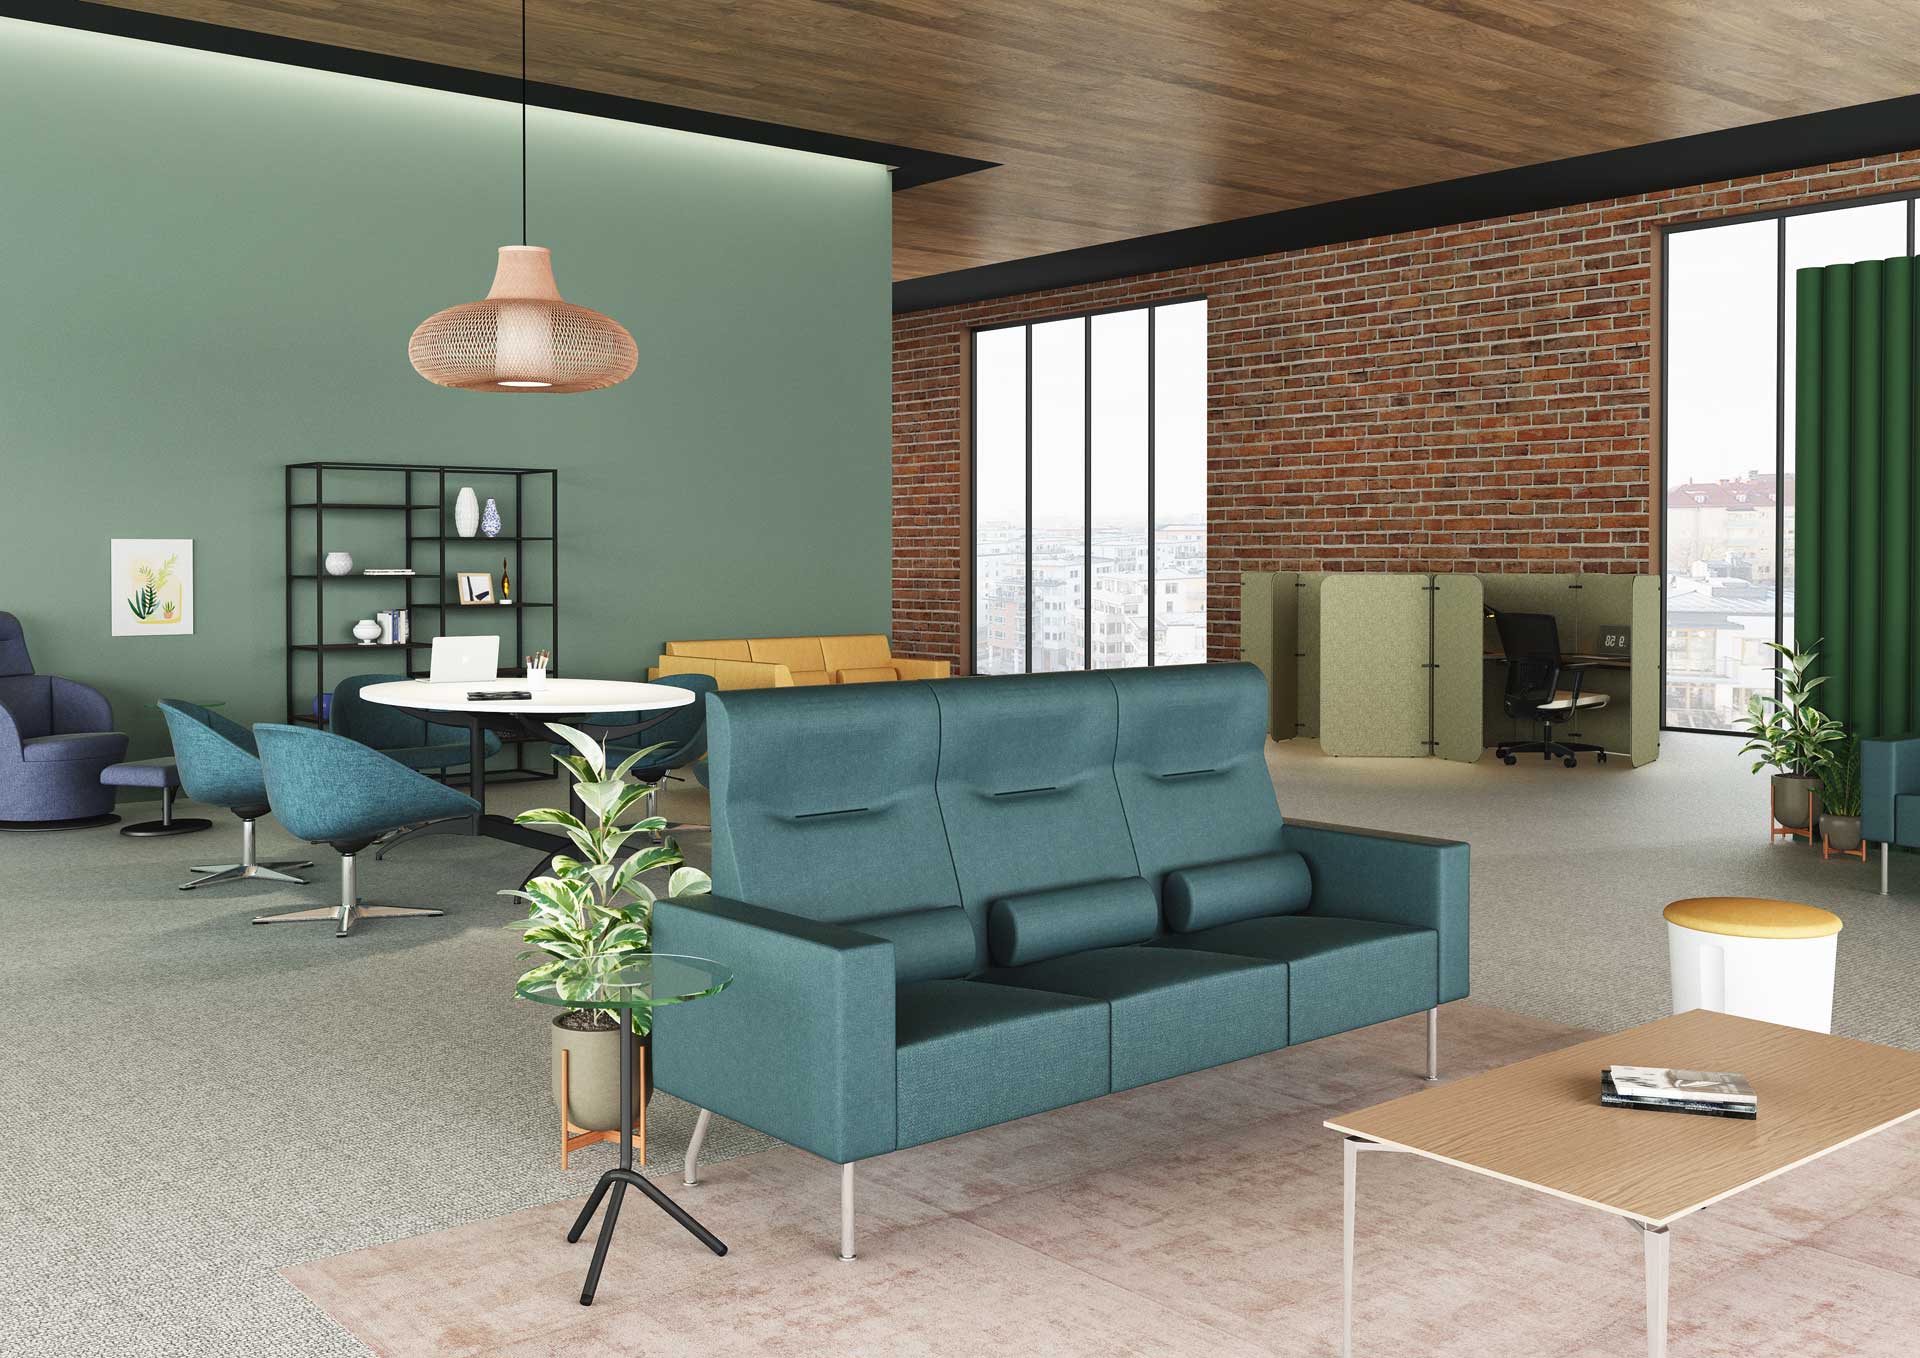 Virtu sv sofa in turquoise fabric in an open space office